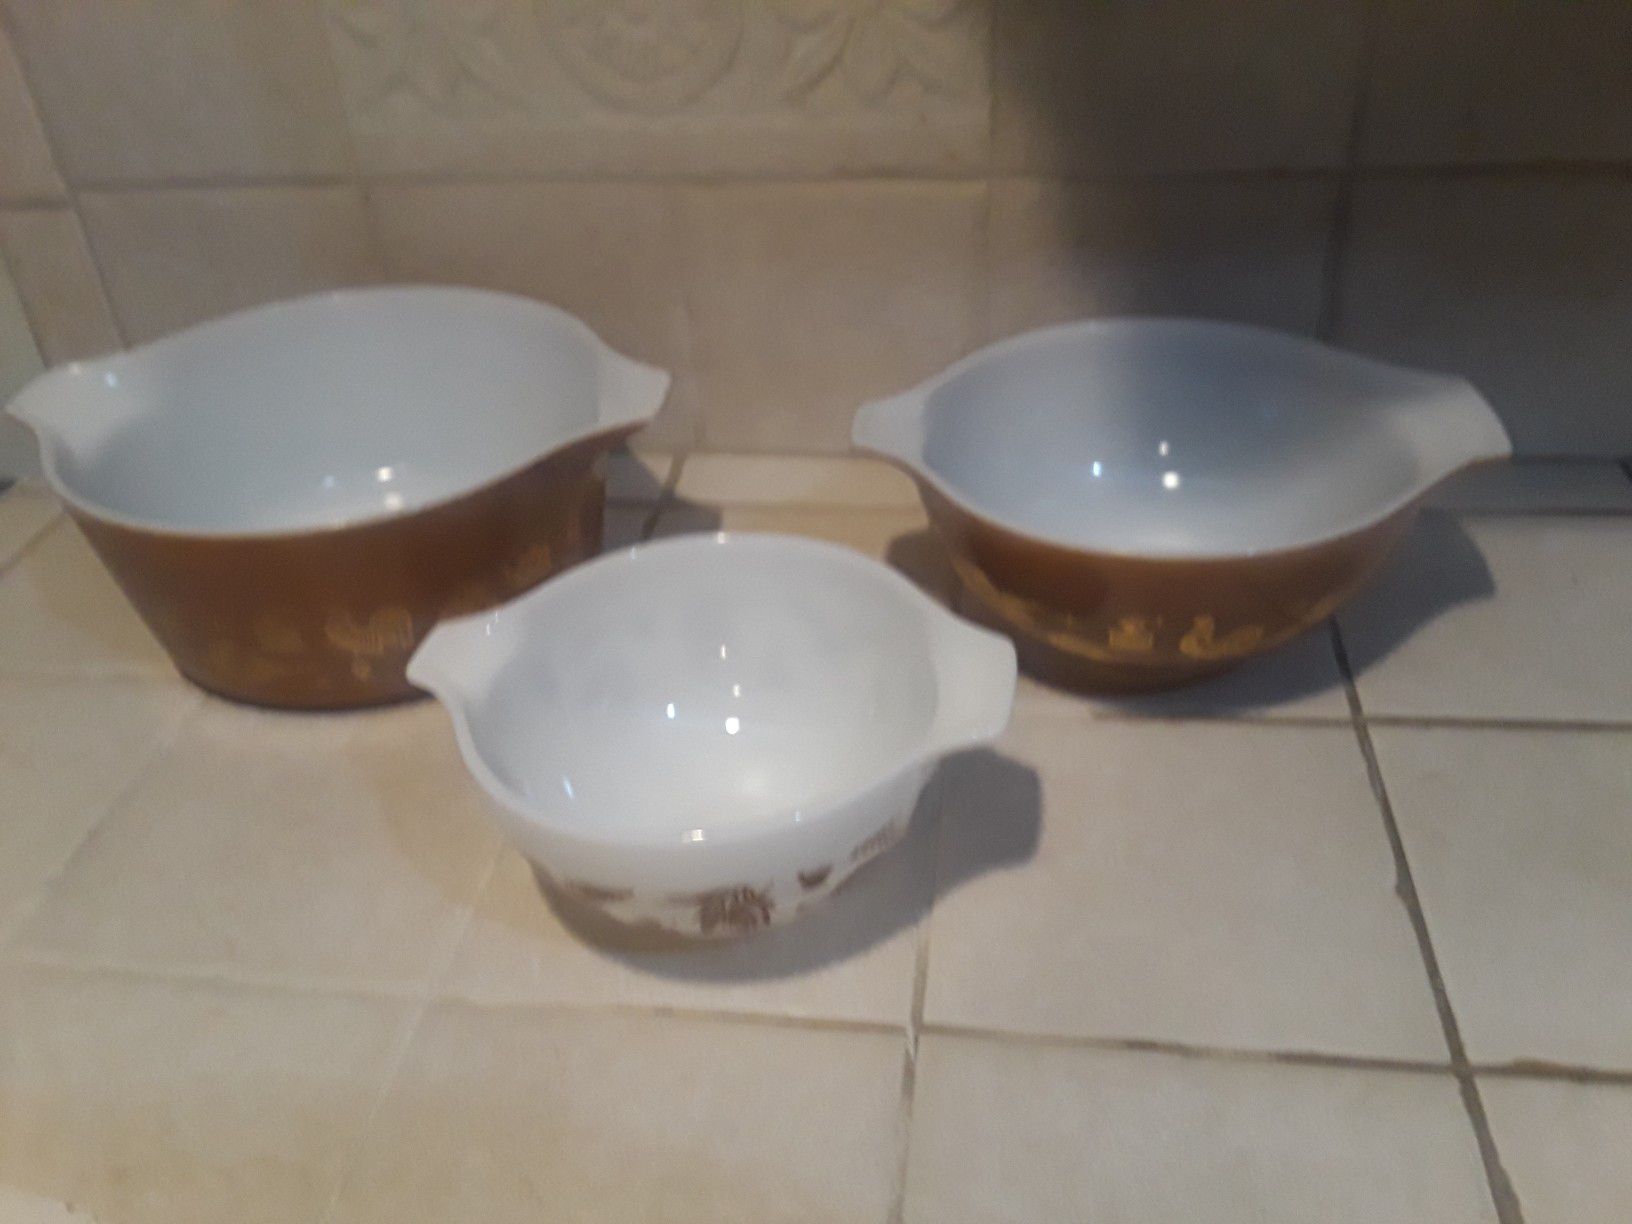 Pyrex Early American Mixing bowls and Casserole dish